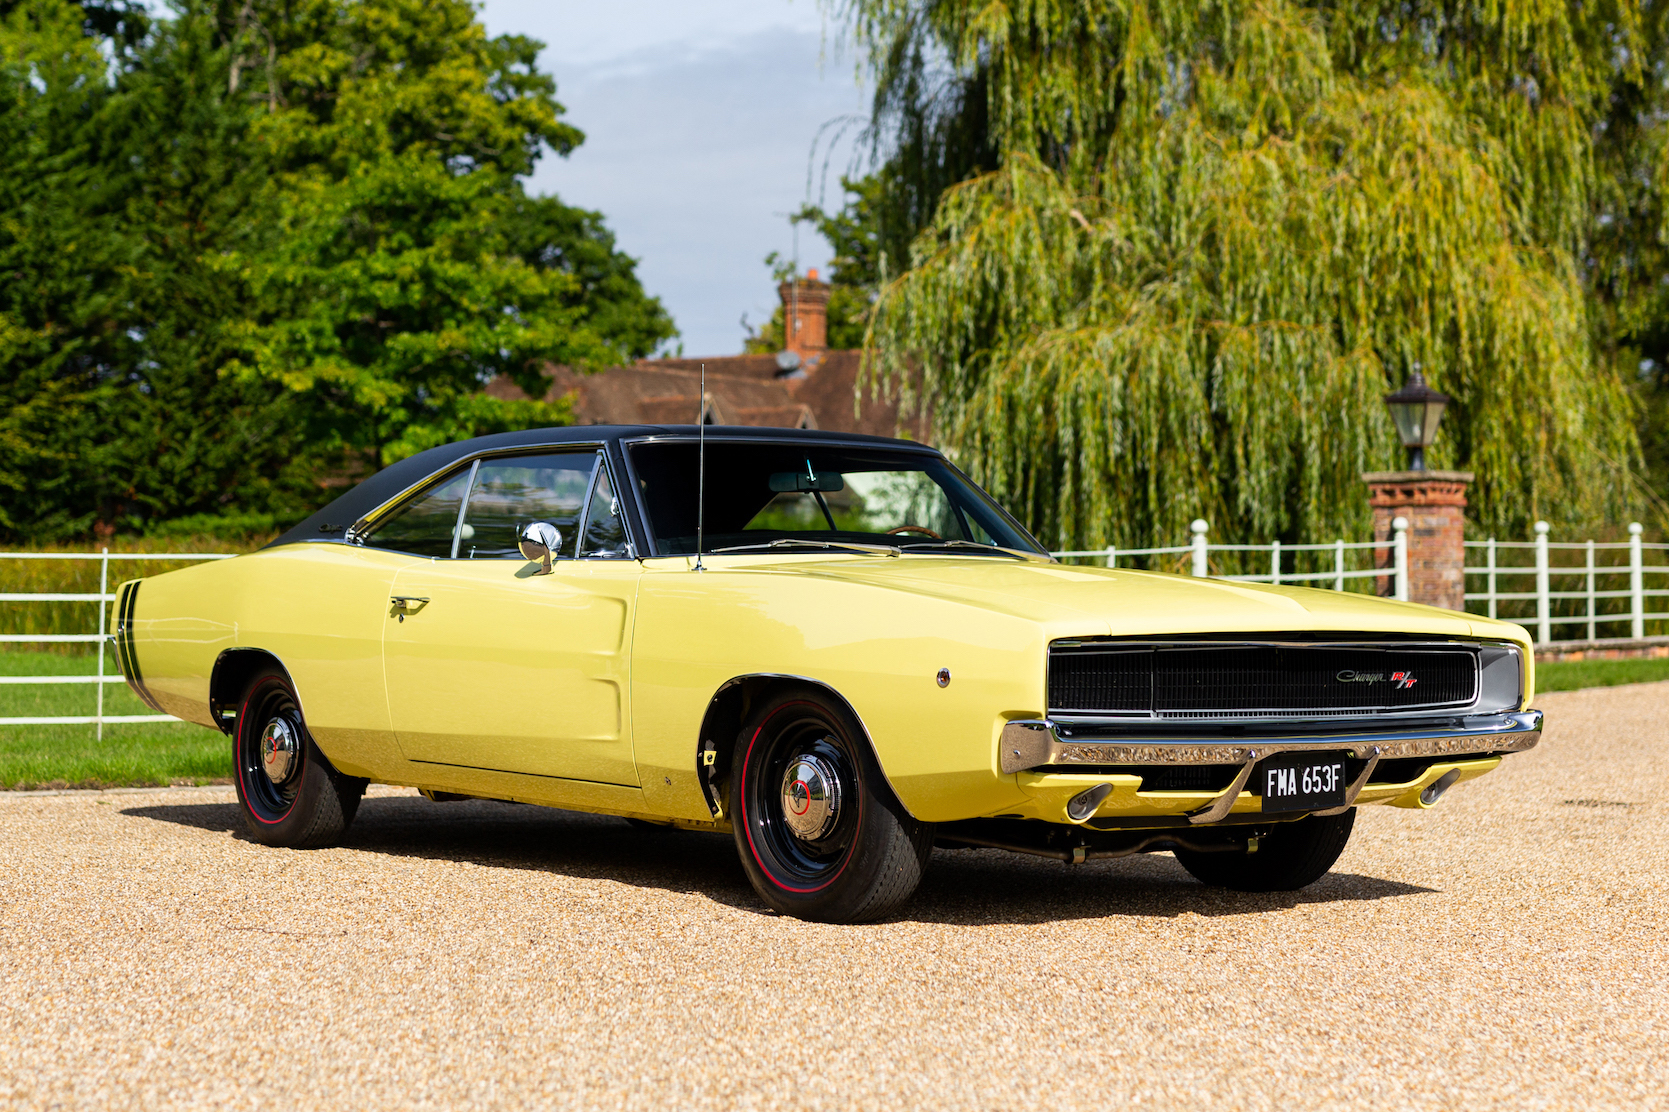 1968 DODGE CHARGER R/T for sale by auction in Surrey, United Kingdom